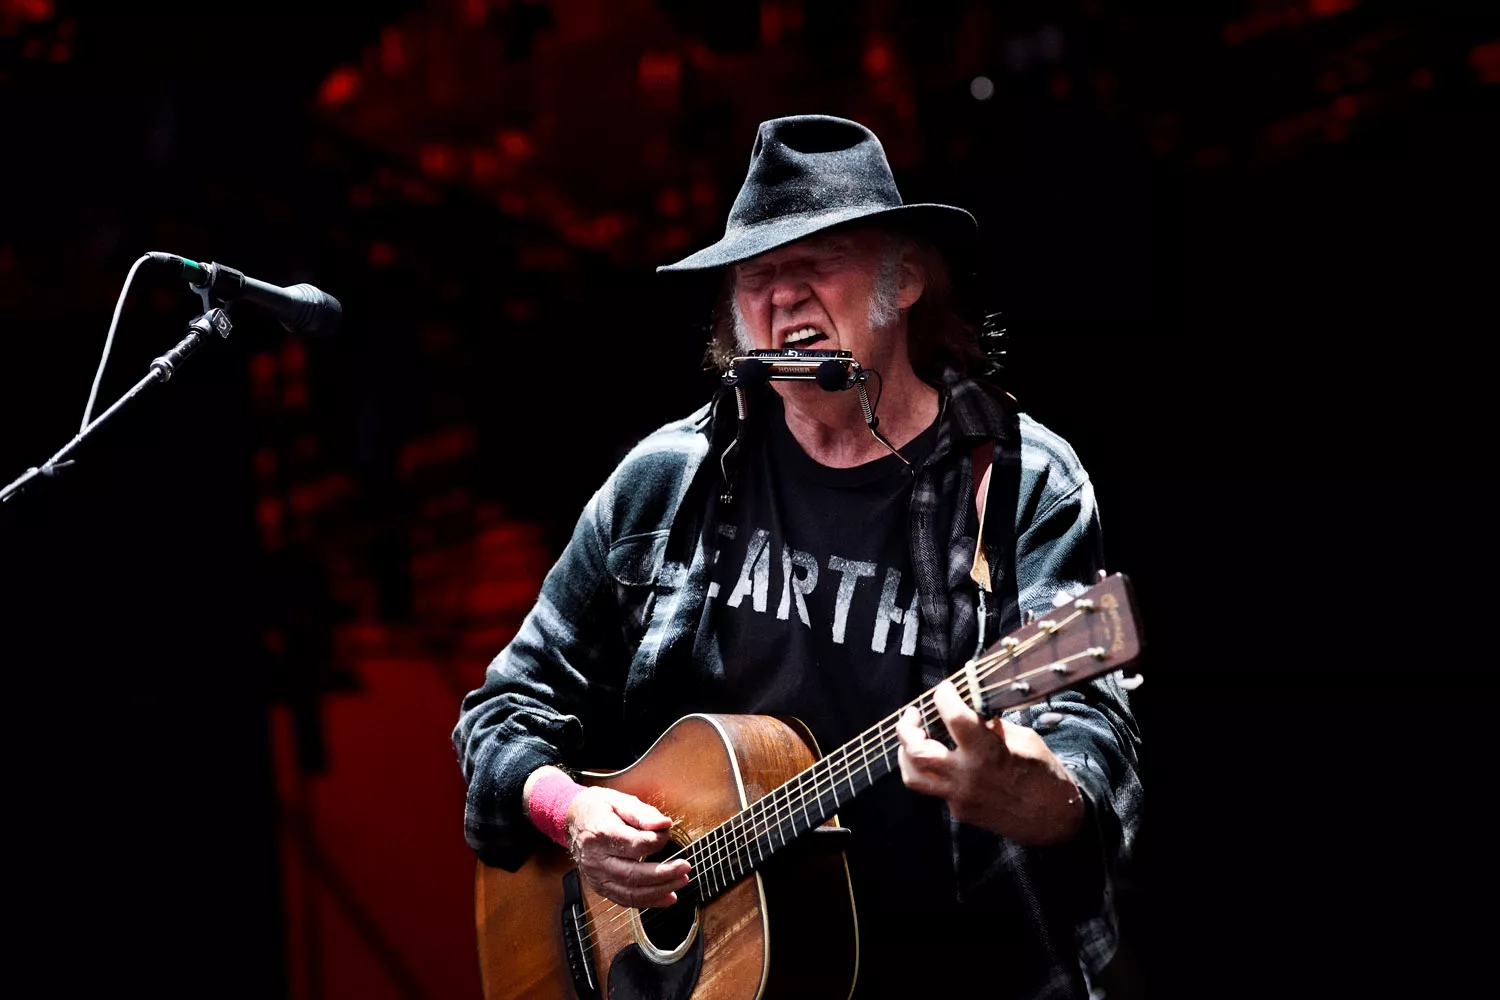 Lenge leve Neil Young